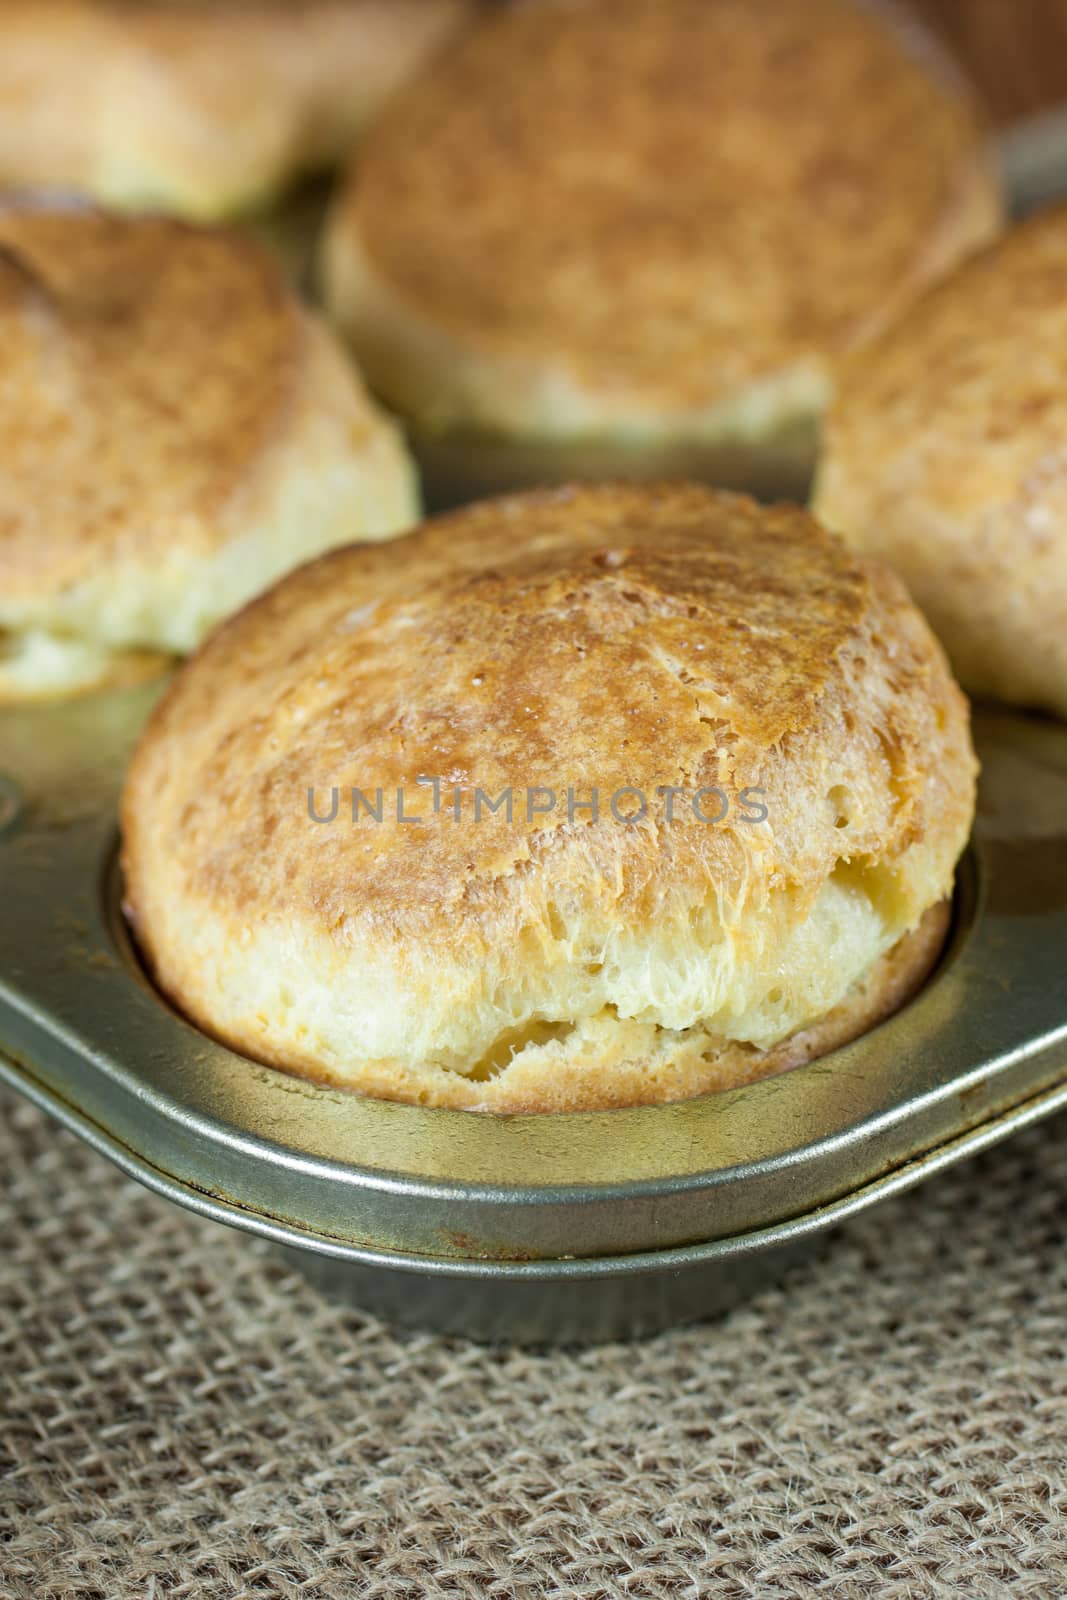 Fresh baked popovers in a metal muffin pan on a burlap surface.